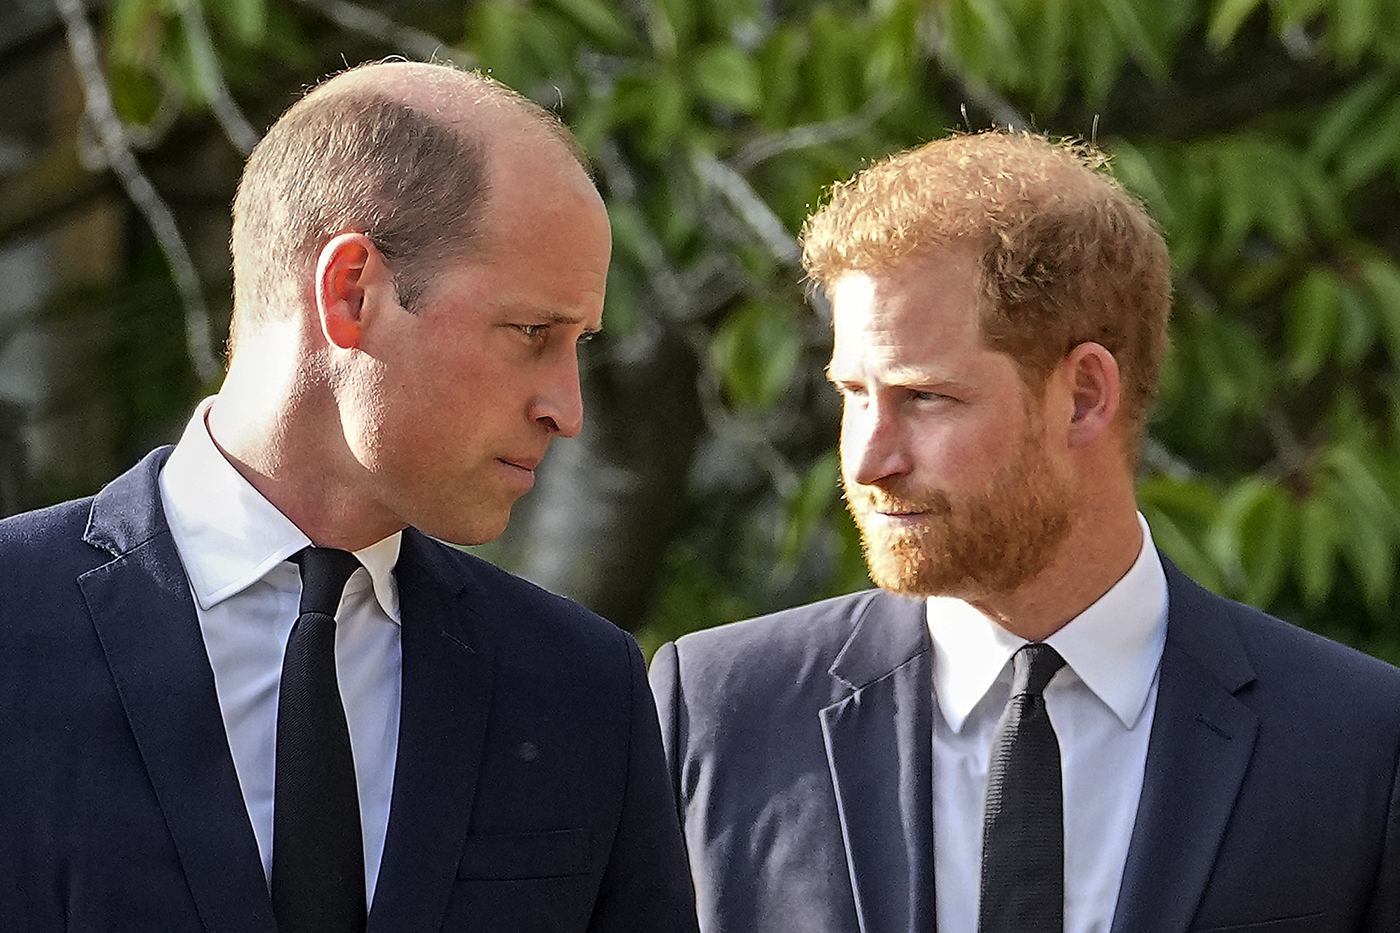 Harry and William looking at each other sternly